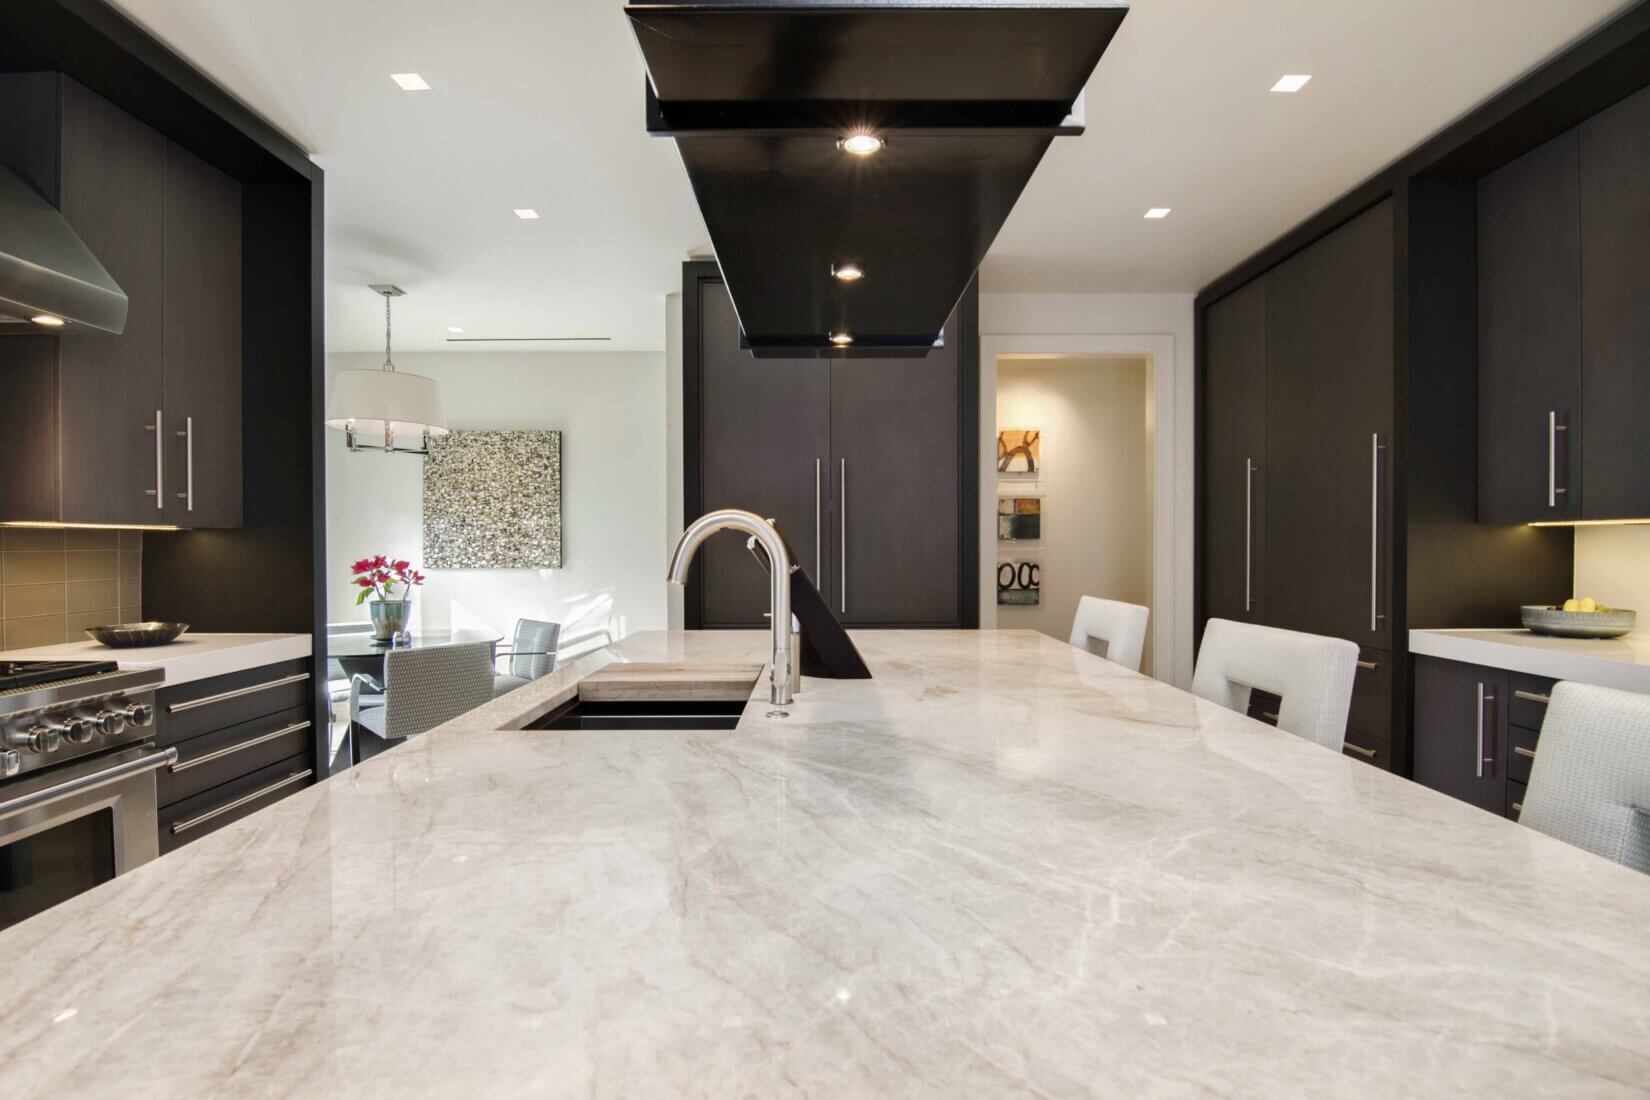 Luxury kitchen with dark-wood cabinetry and white marble counters